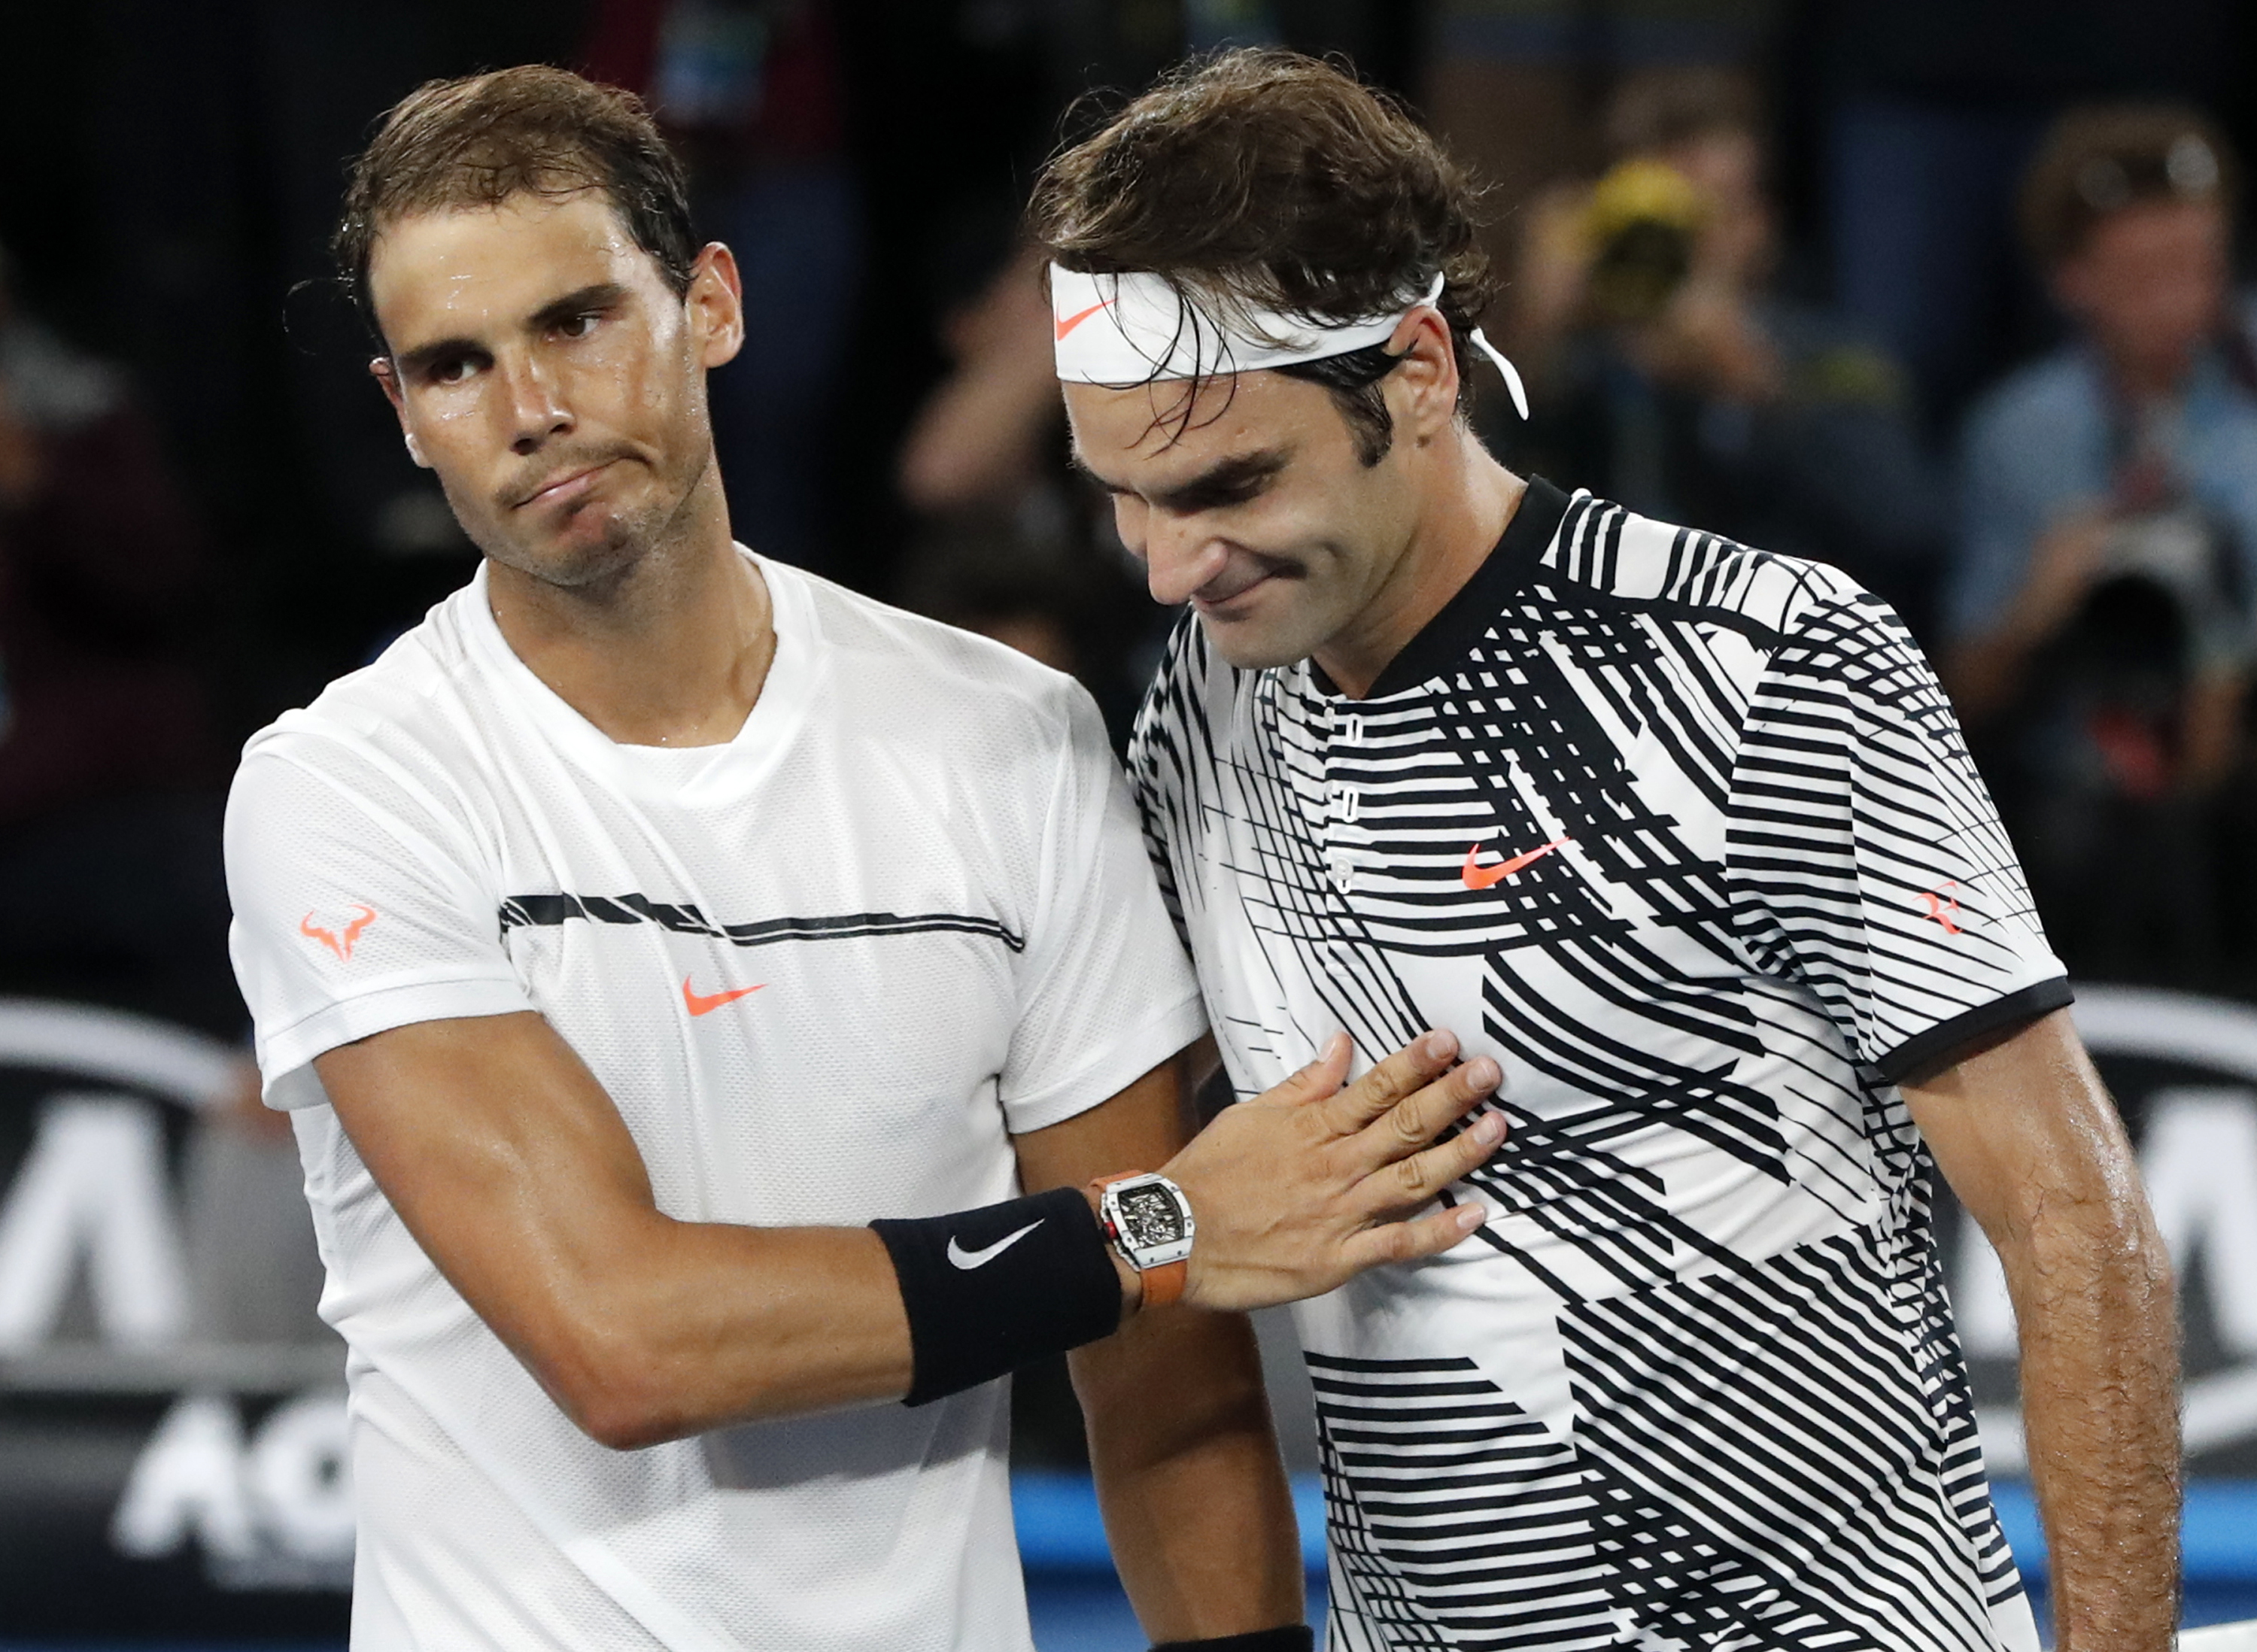 Switzerland's Roger Federer, right, is congratulated by Spain's Rafael Nadal, after Federer won the men's singles final at the Australian Open tennis championships in Melbourne, Australia, Sunday, Jan. 29, 2017.(AP Photo/Dita Alangkara)